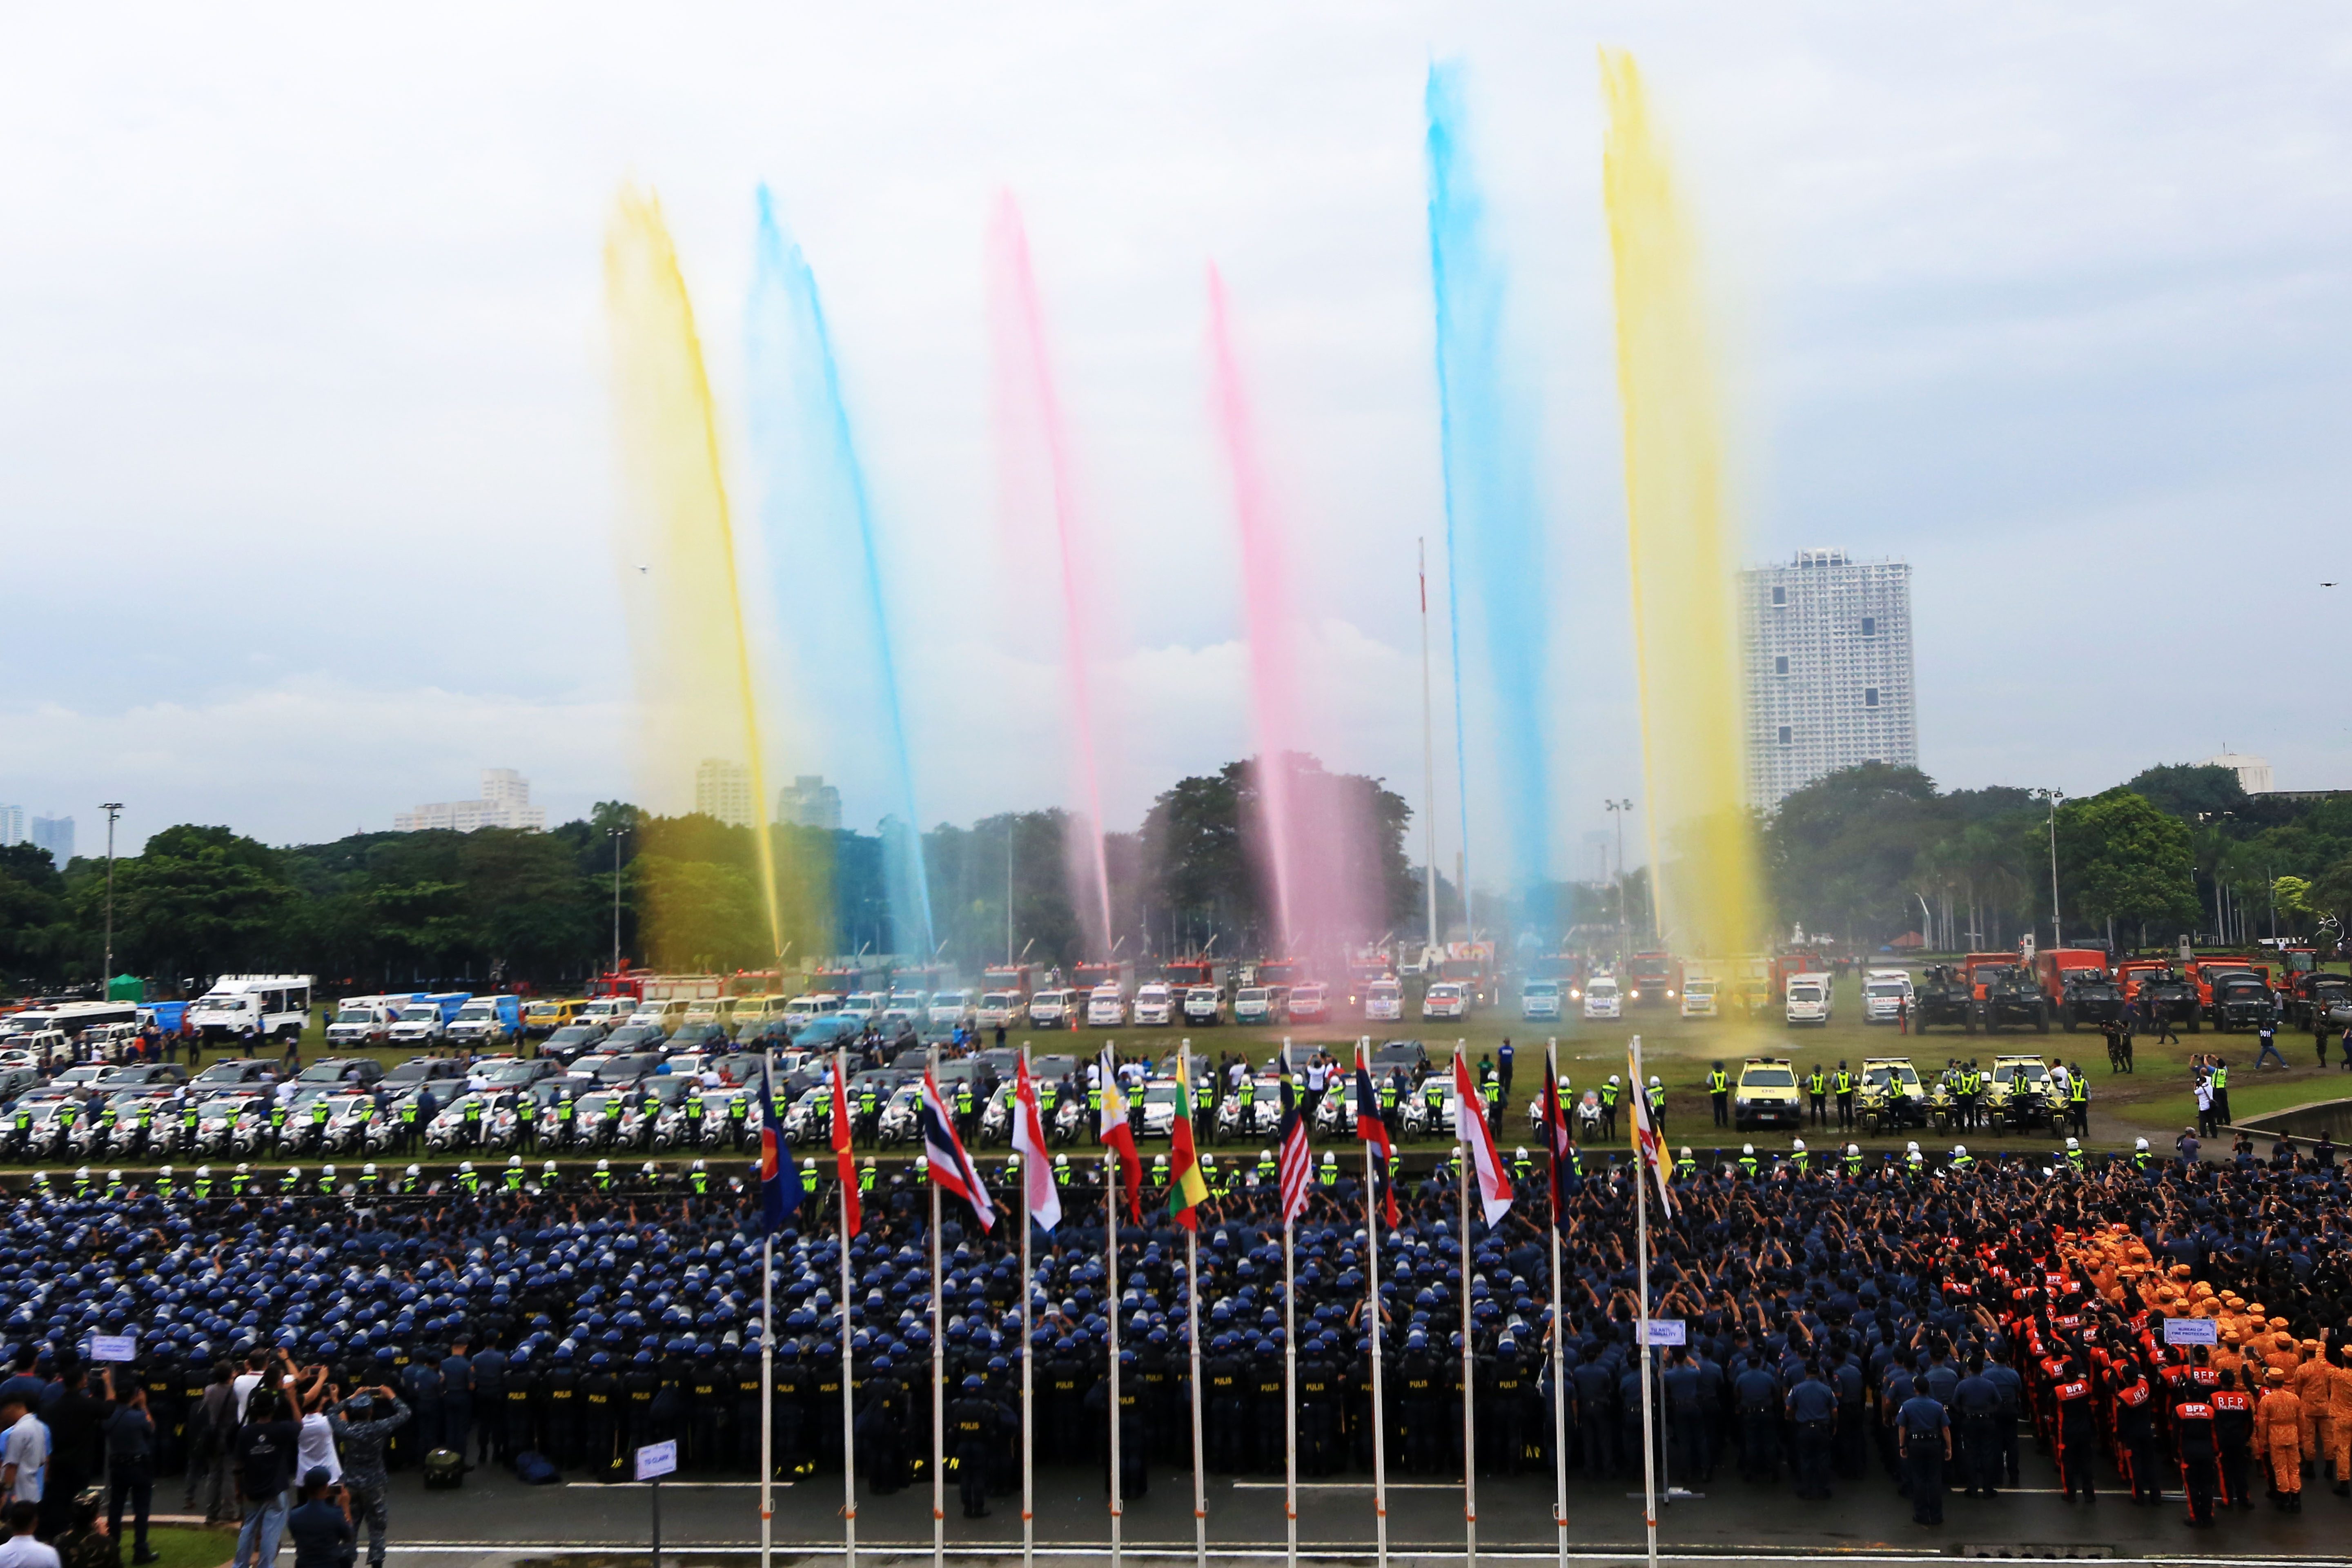 SEND OFF. Participating agencies for the implementation of security for the ASEAN Summit gather at the Quirino Grandstand in Manila for their deployment on November 5, 2017. Photo by Ben Nabong/Rappler 